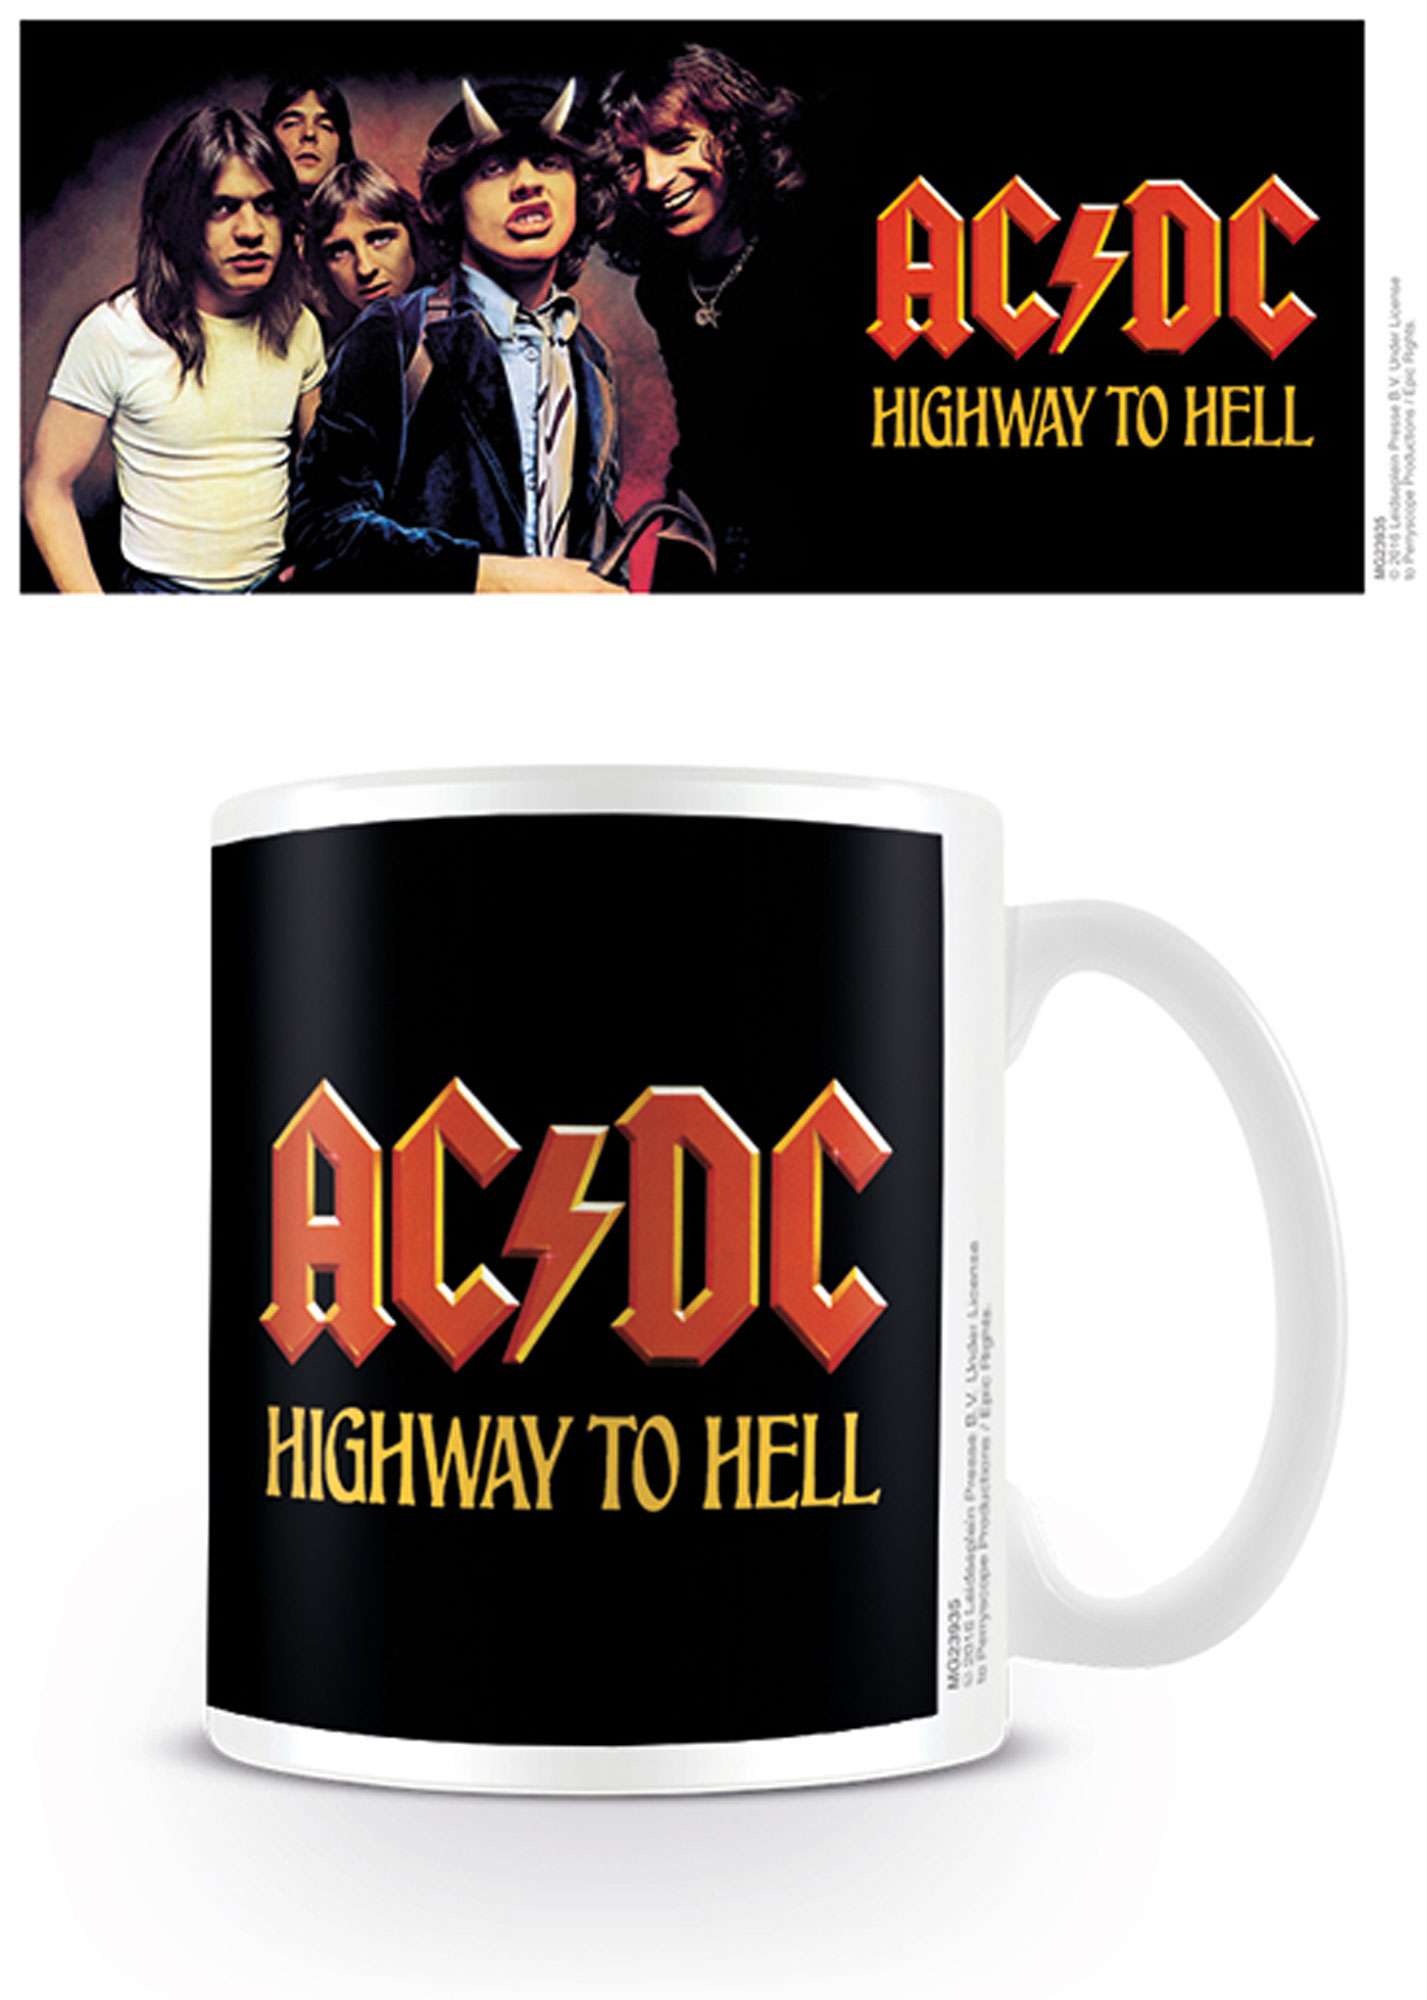 Hell Highway to - AC/DC